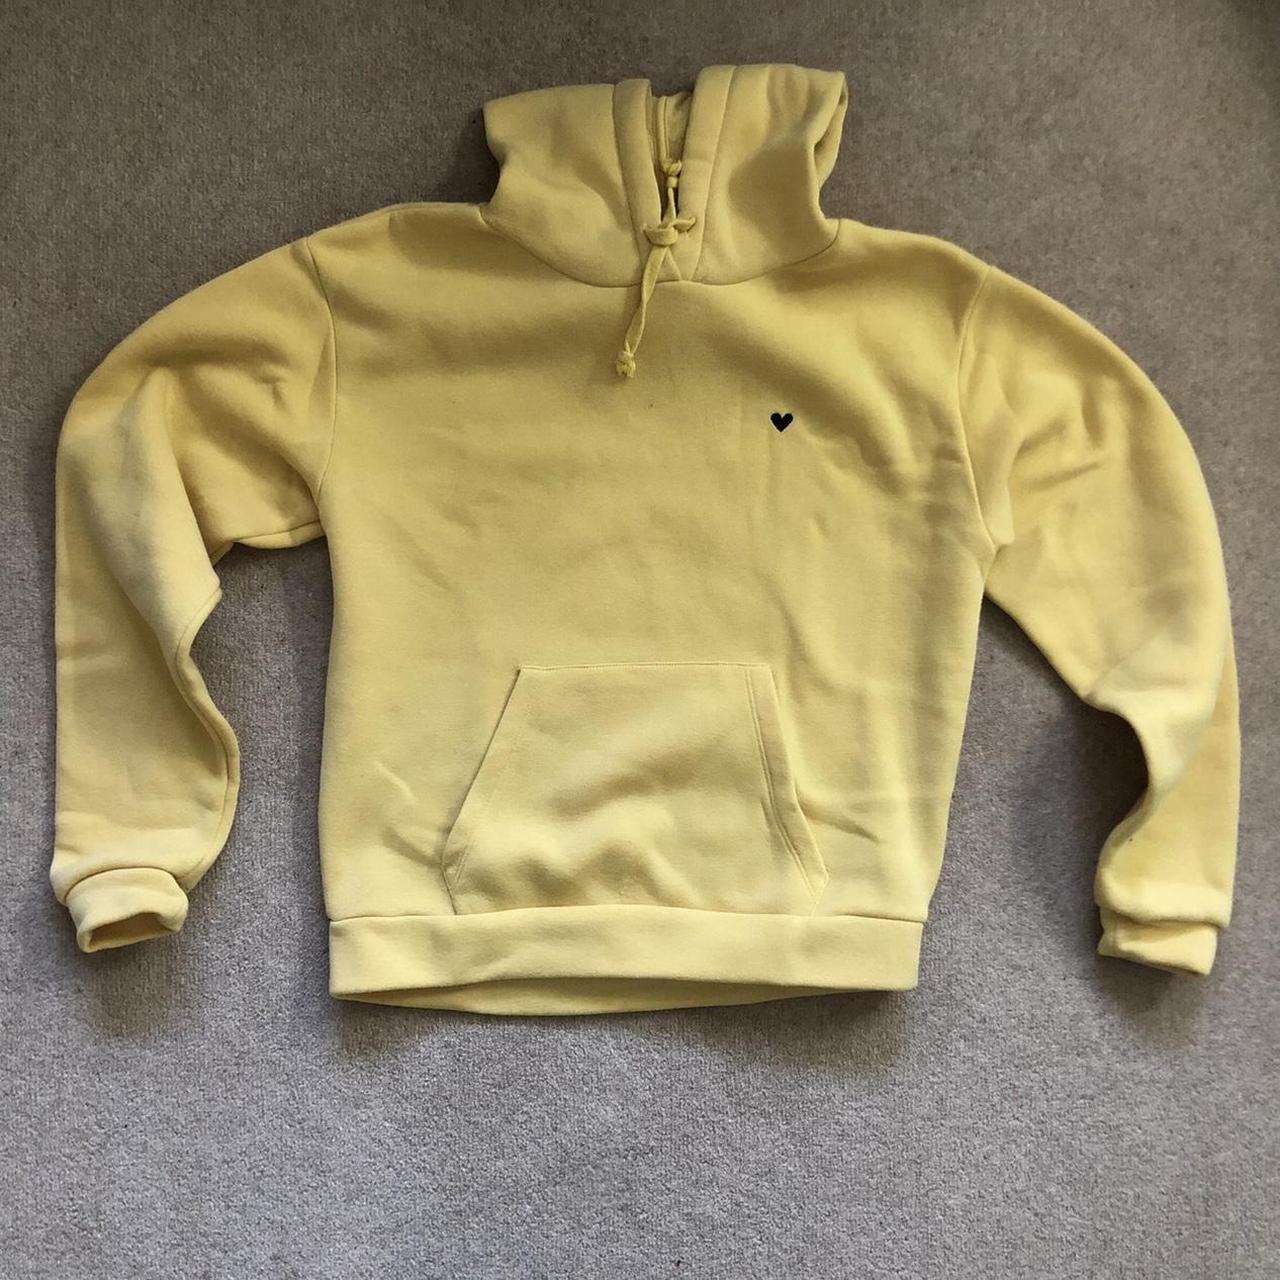 yellow Topshop hoodie in size s - softest hoodie and... - Depop